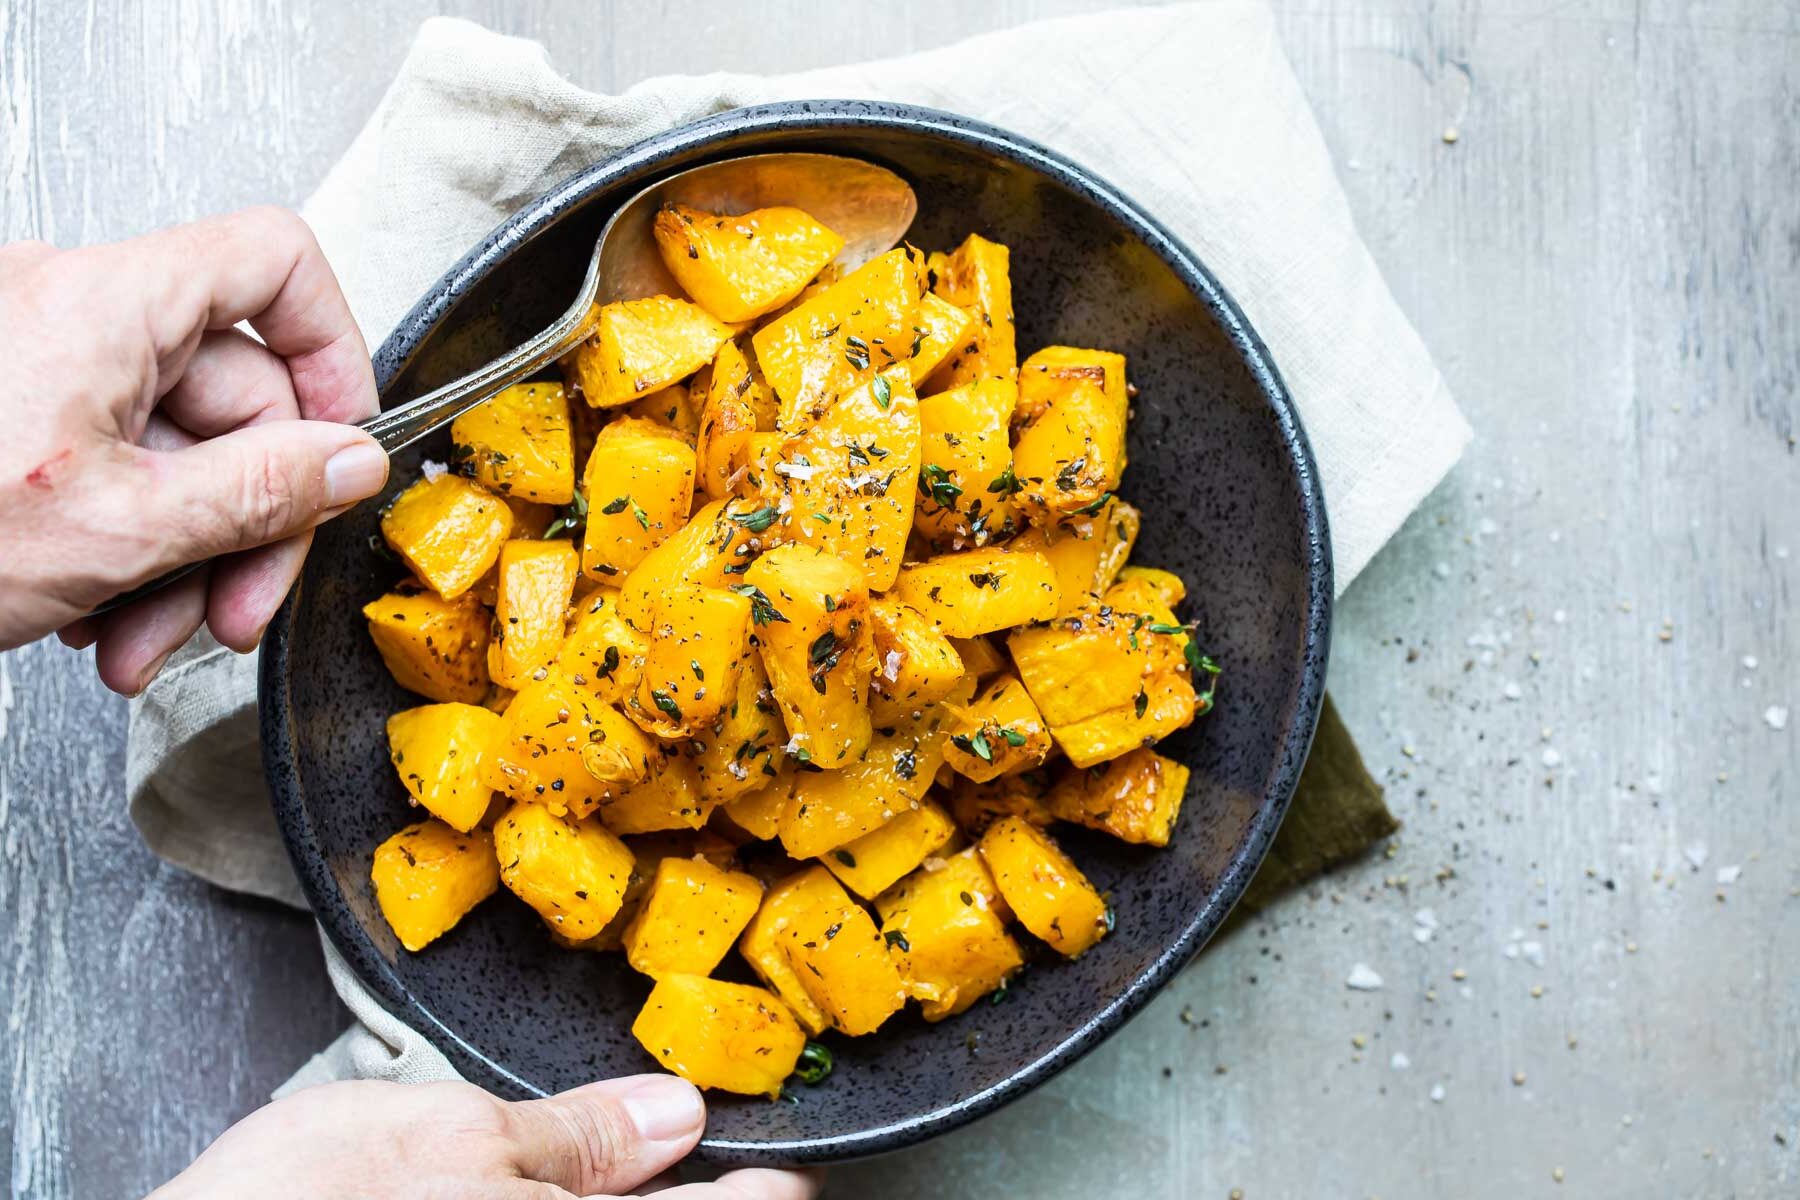 Roasted butternut squash in a serving bowl.